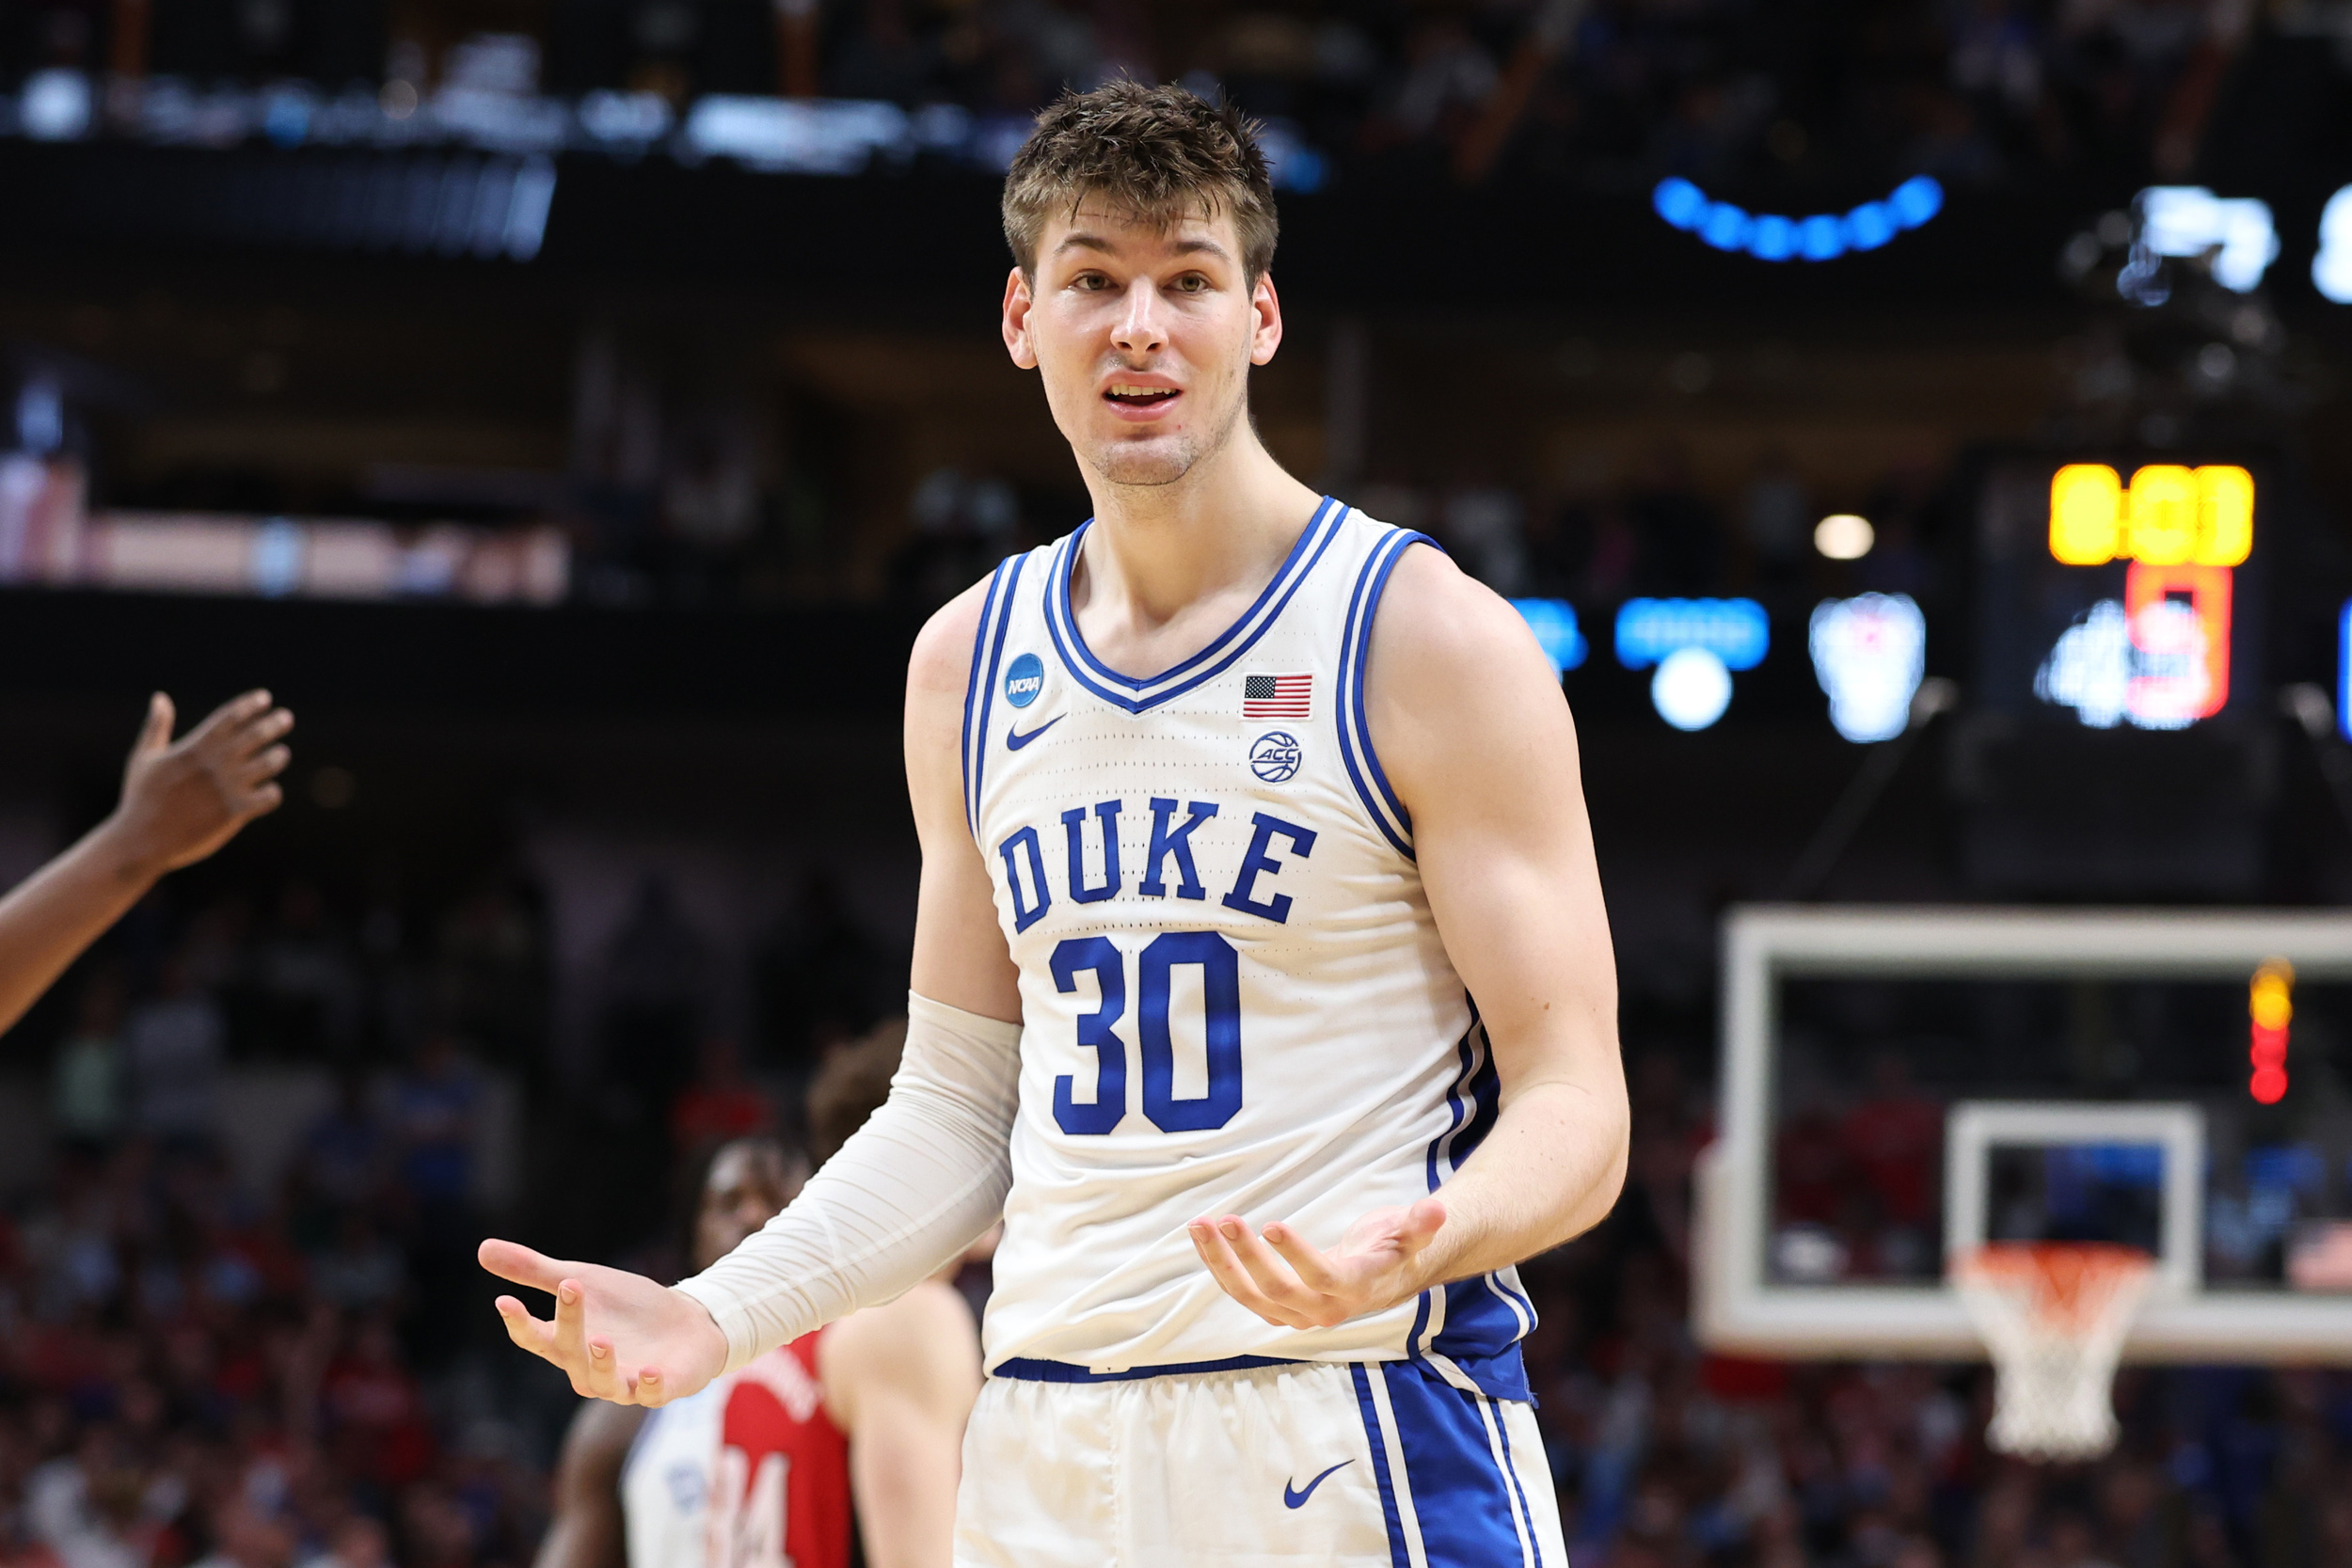 duke loses second star underclassman one hour after teammate declares for nba draft